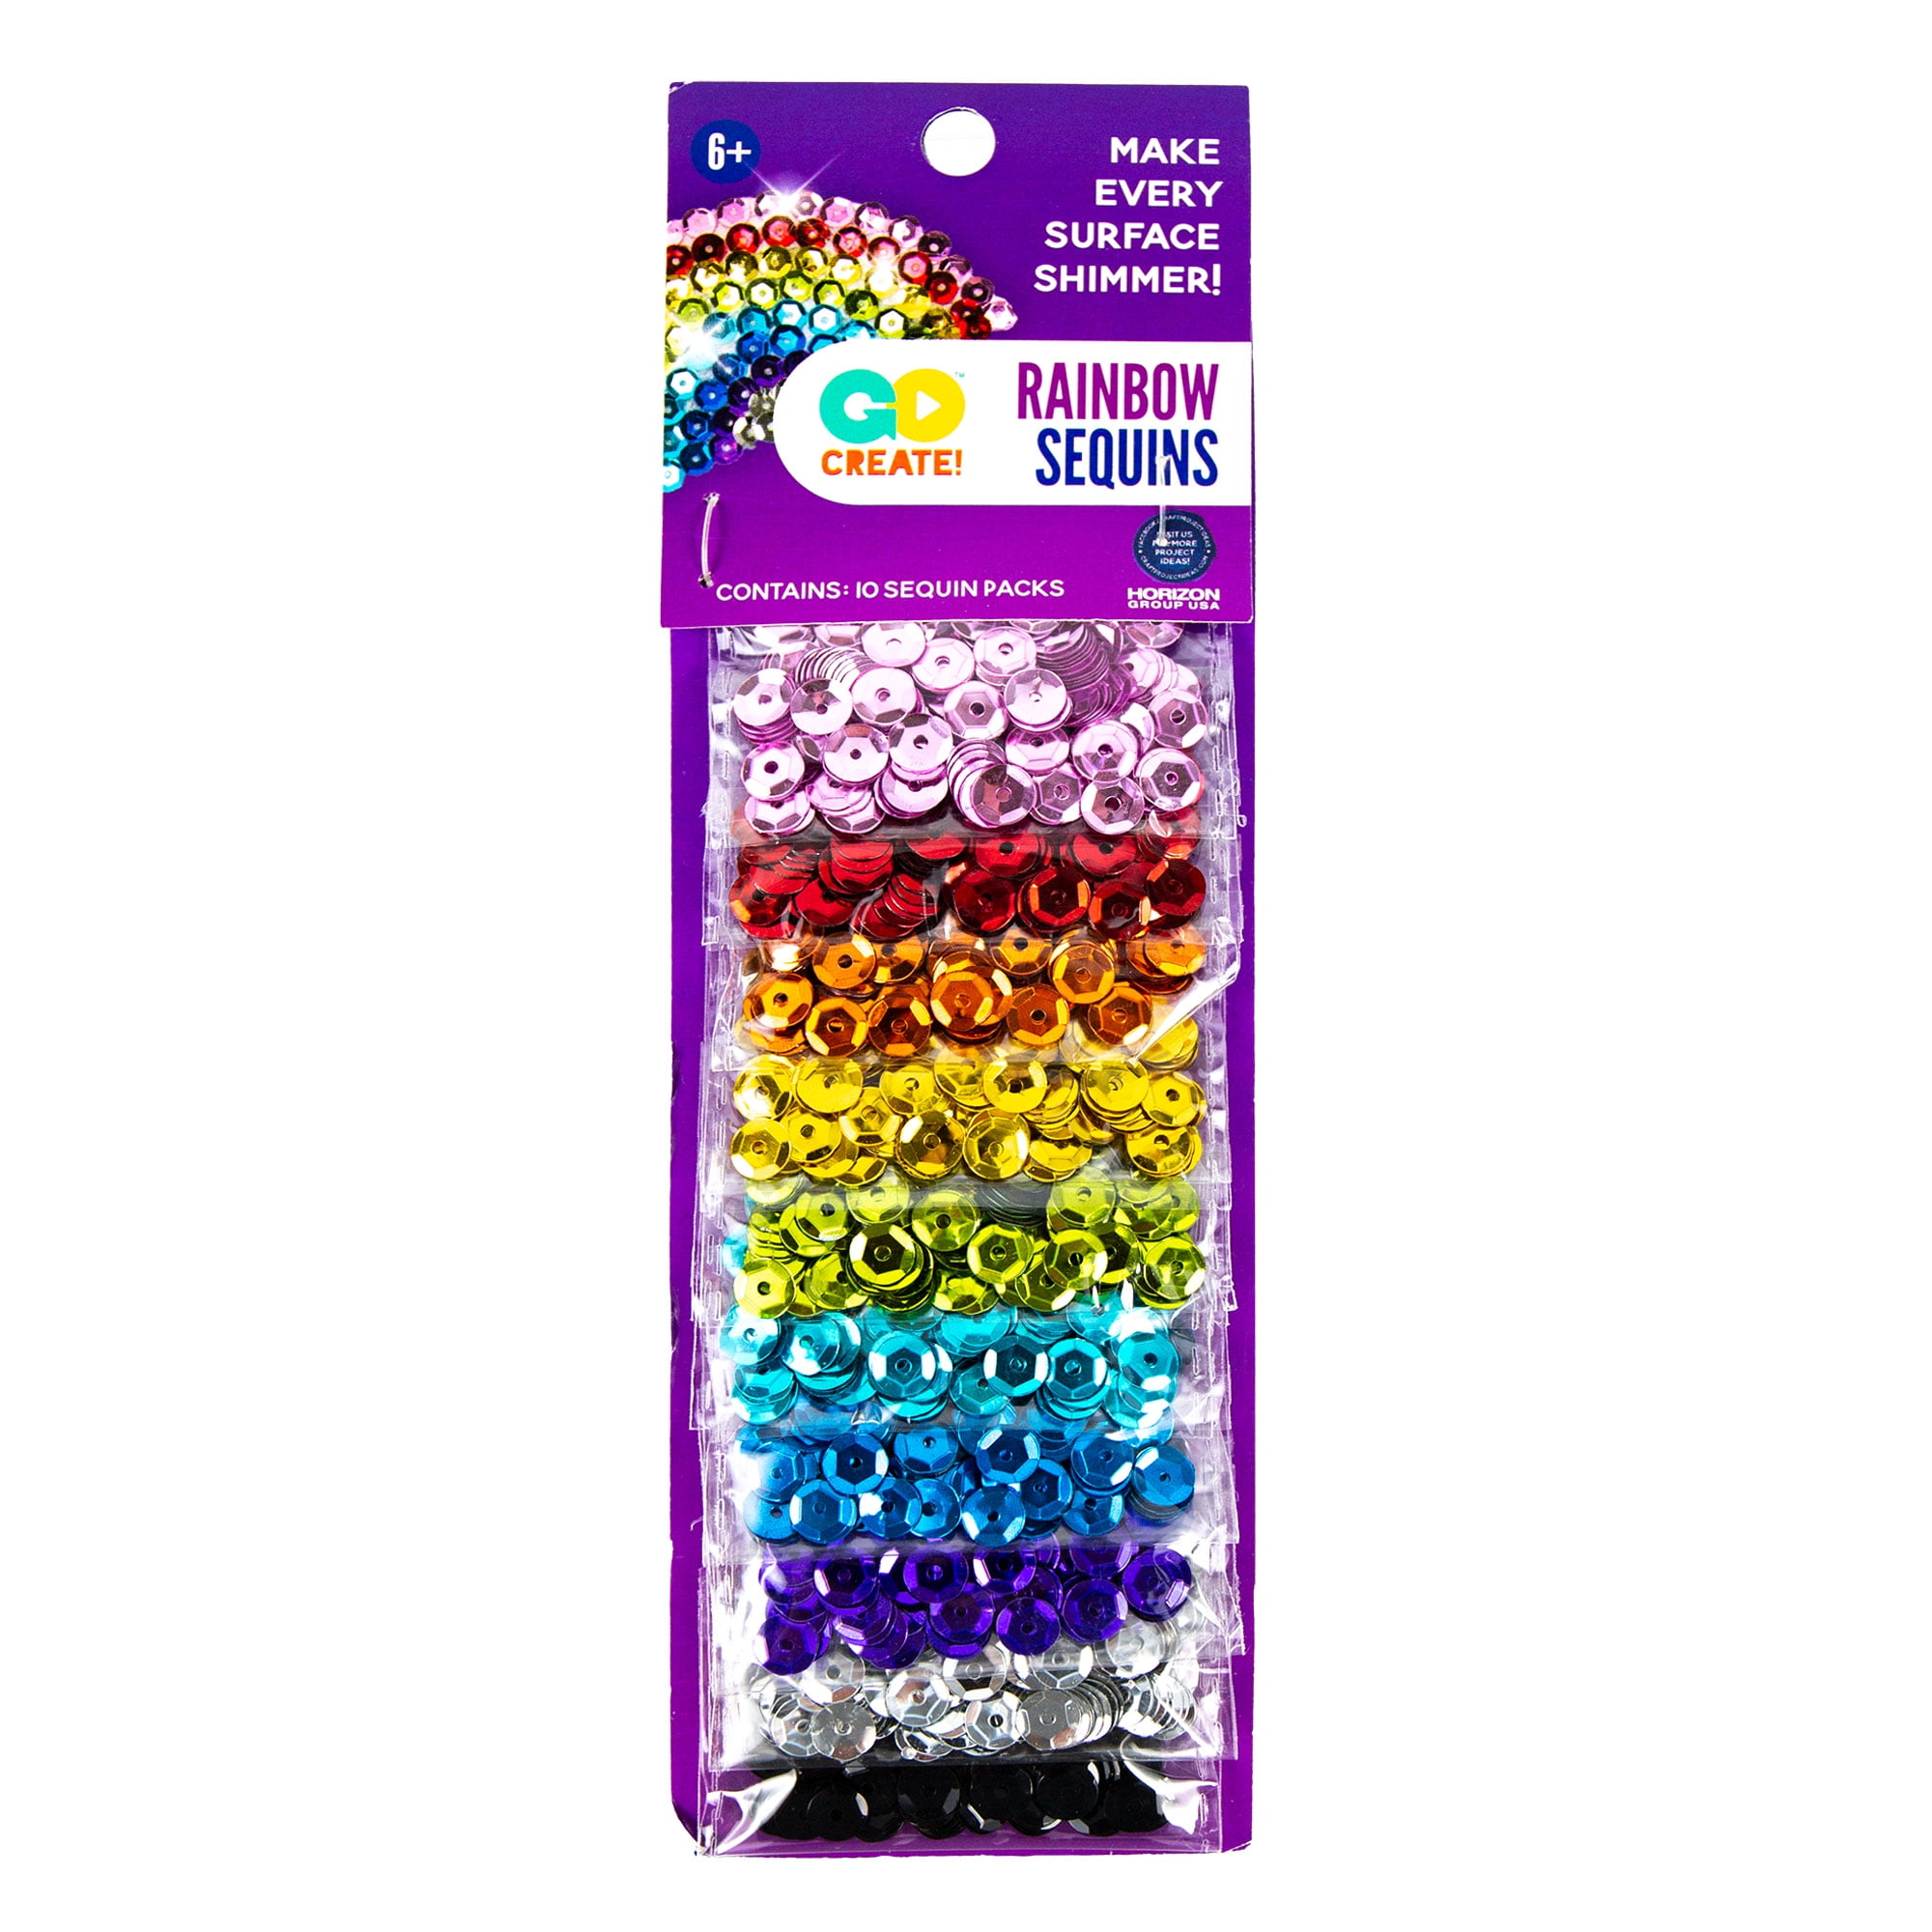 SAVE money 16 different types of sequins in one pack Total 5,6 oz 10 gr Sequins 16 x 0,35 oz Free Shipping HUGE SAVING offer